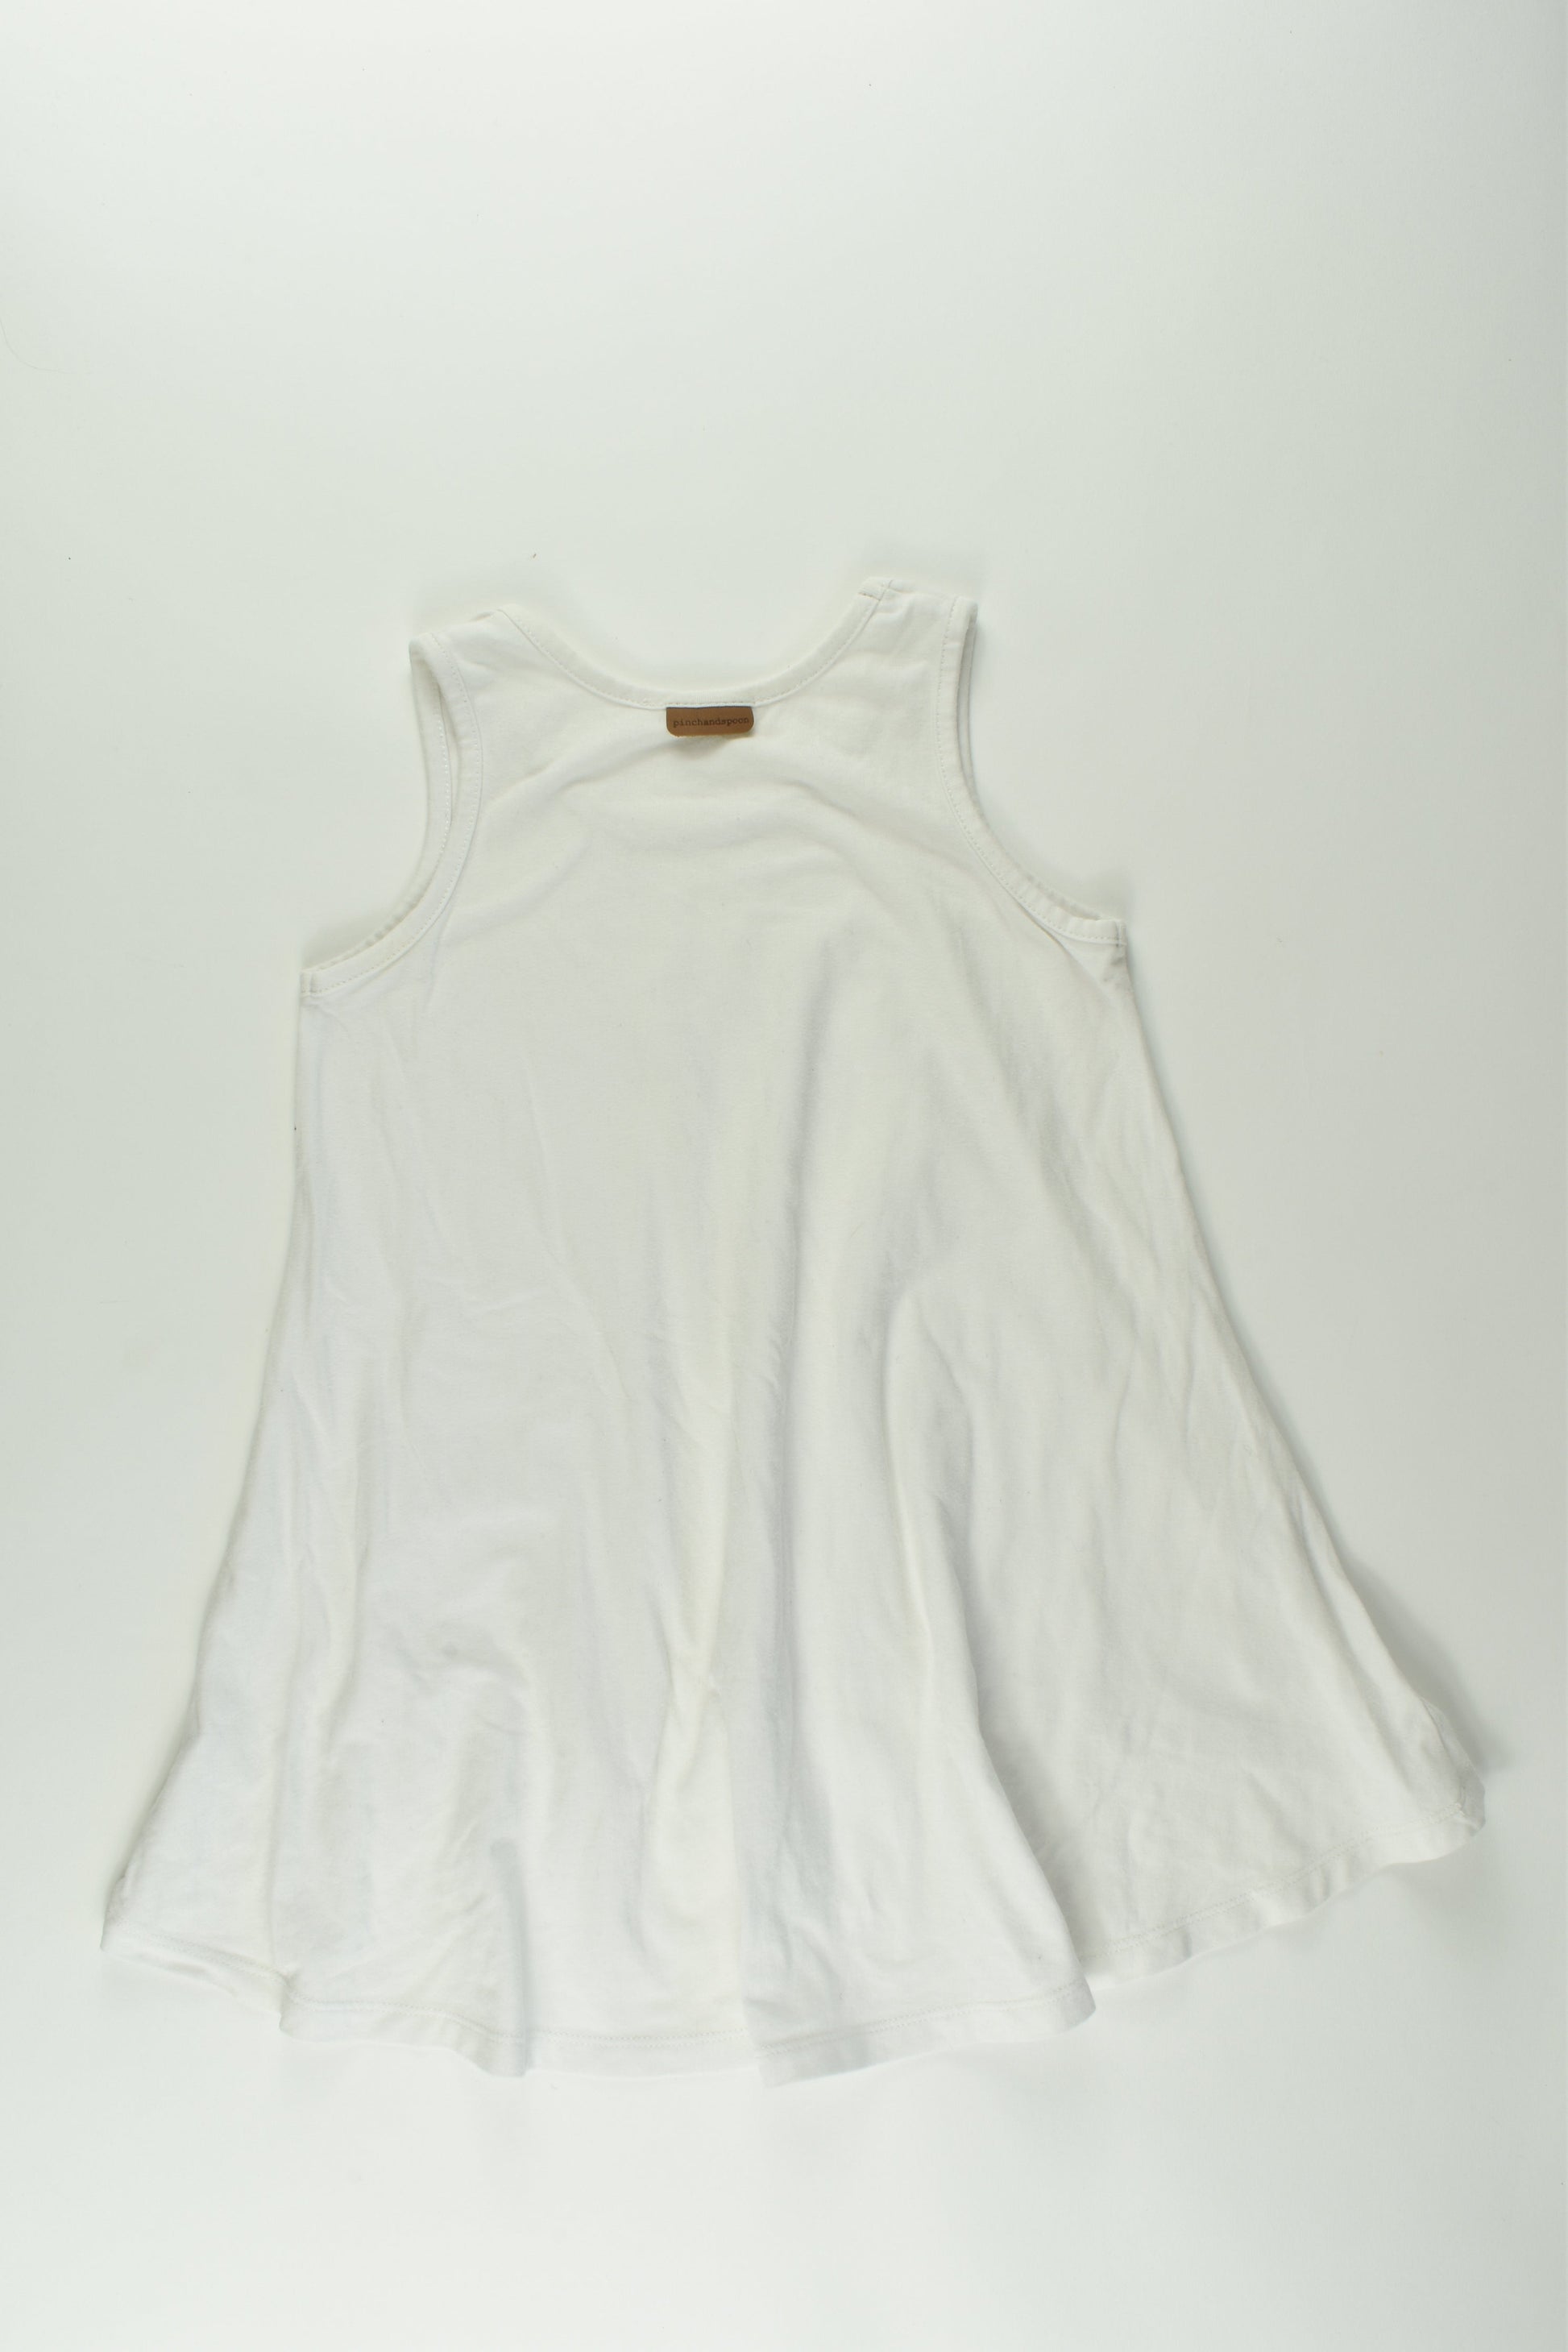 Pinch and Spoon Size 8 Long Back Tank Top